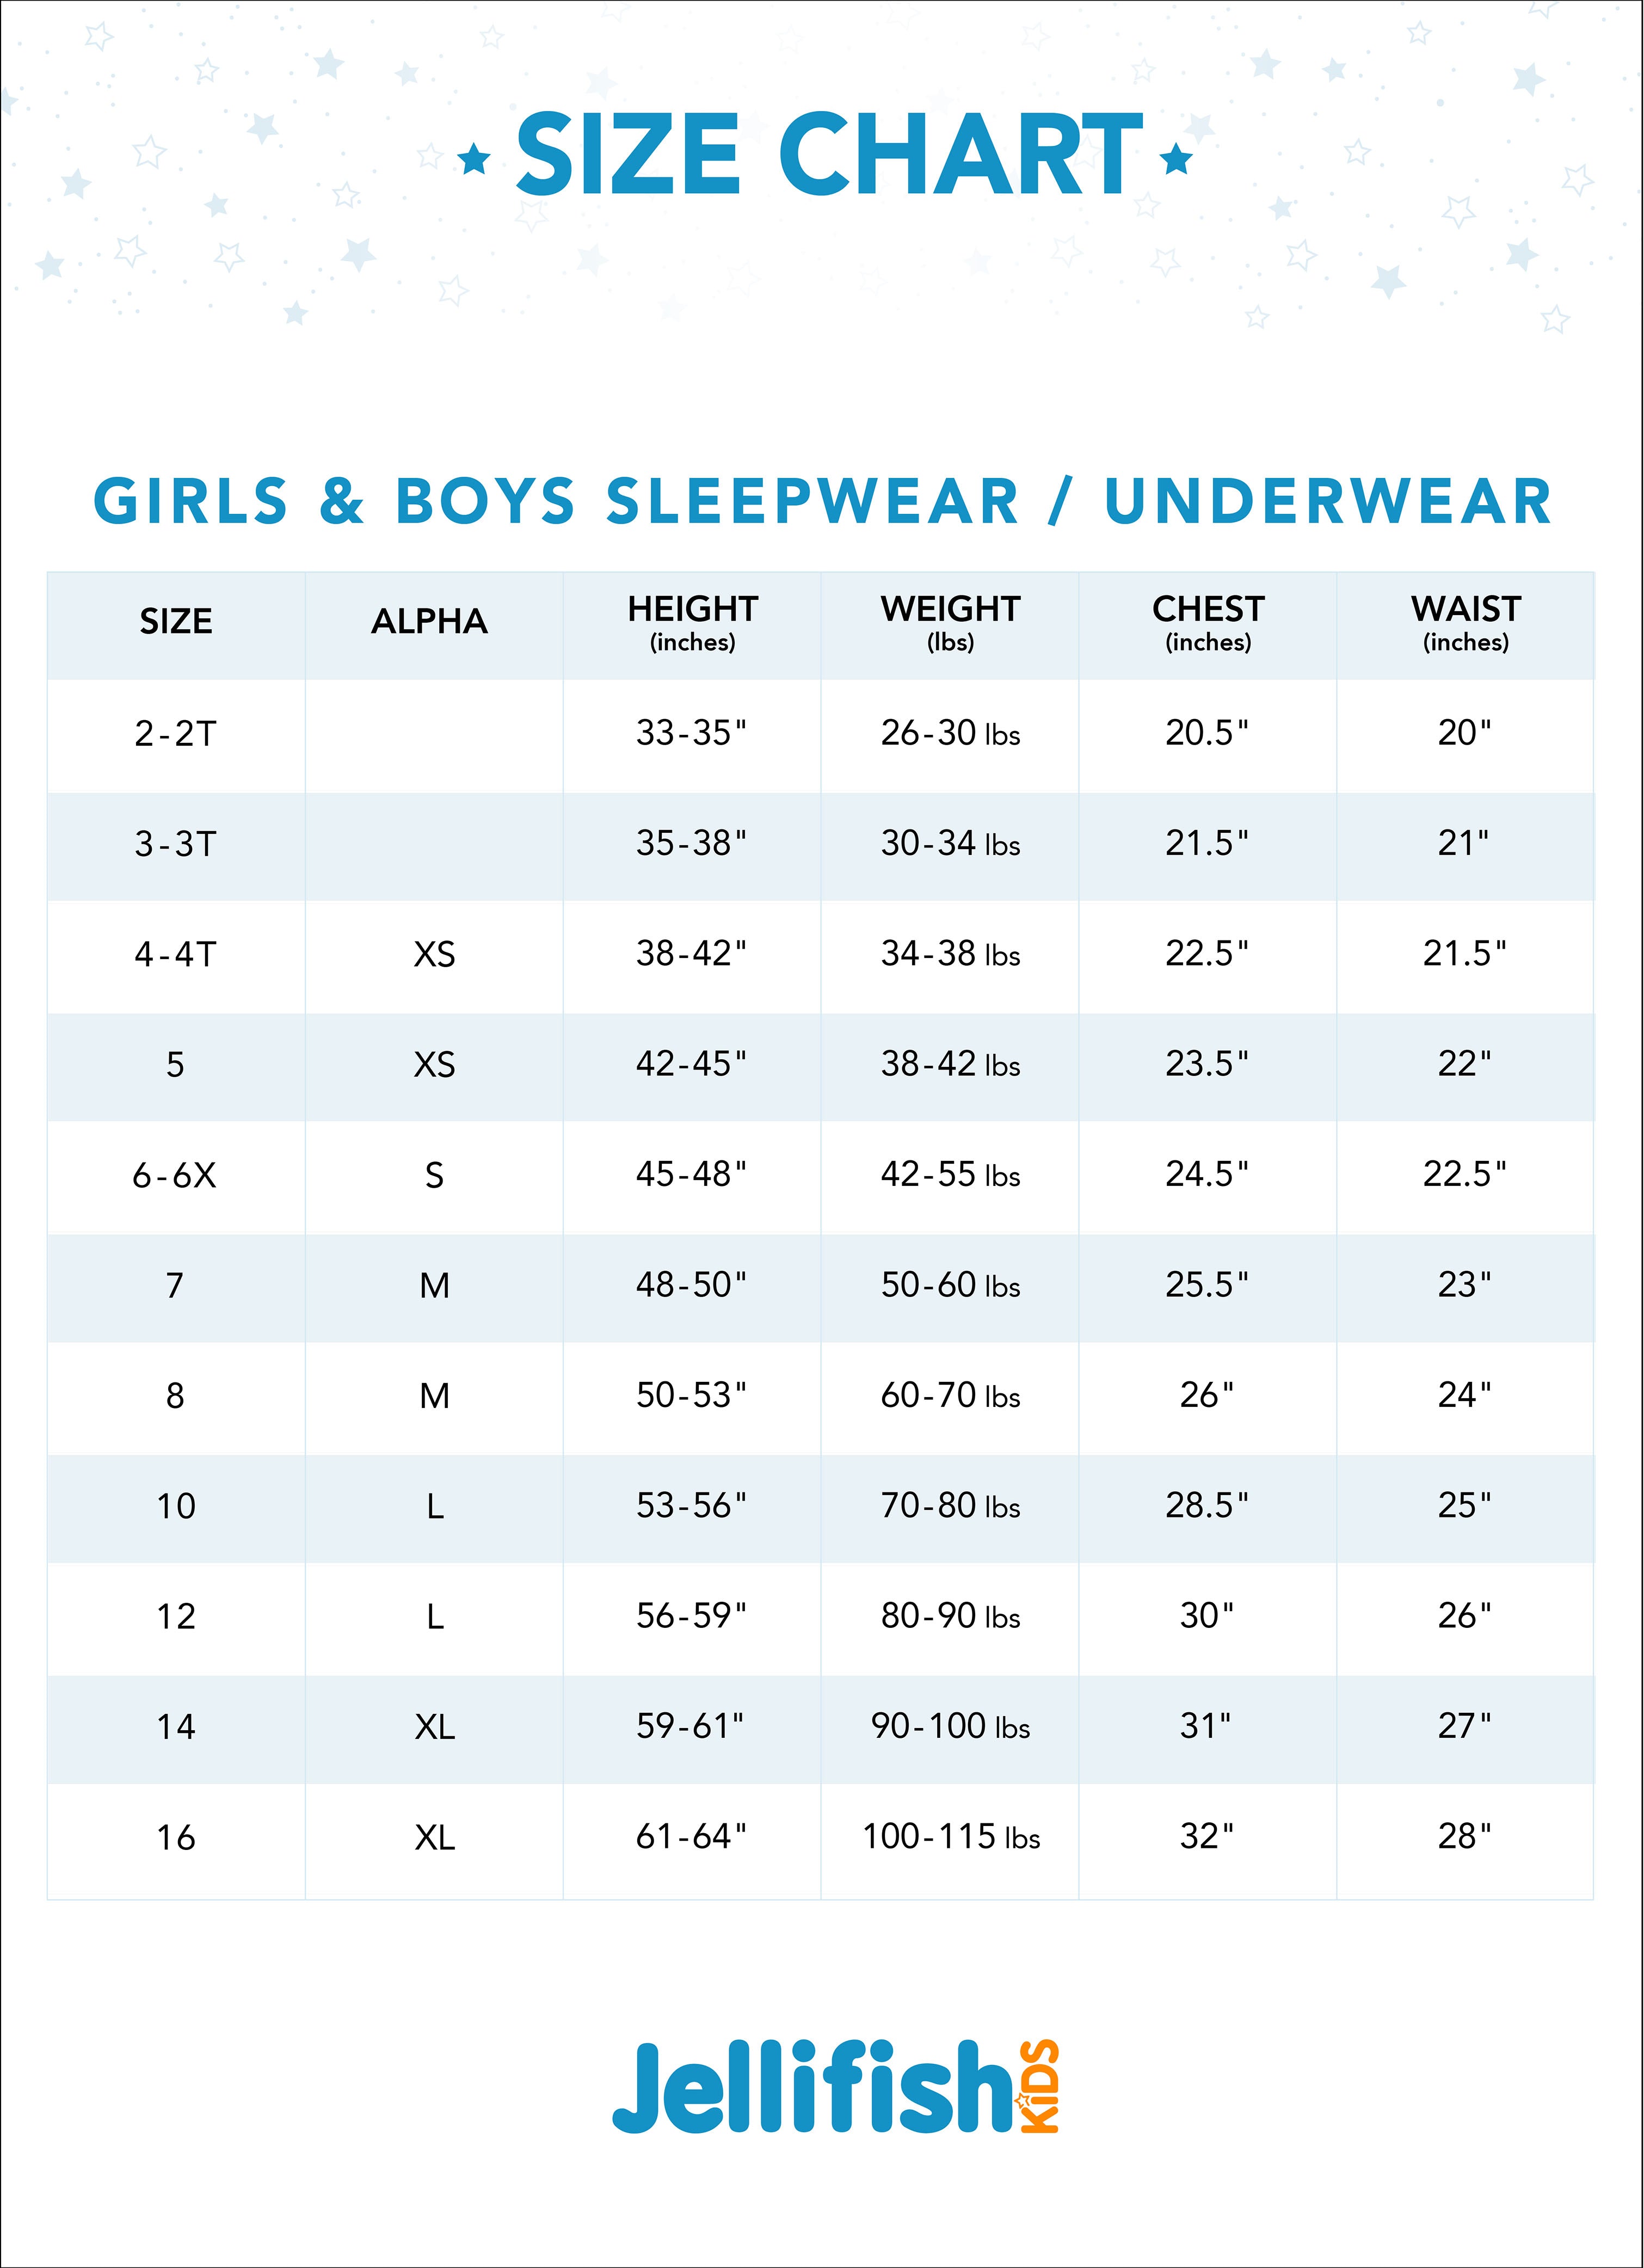 Baby Clothes Size Chart Canada